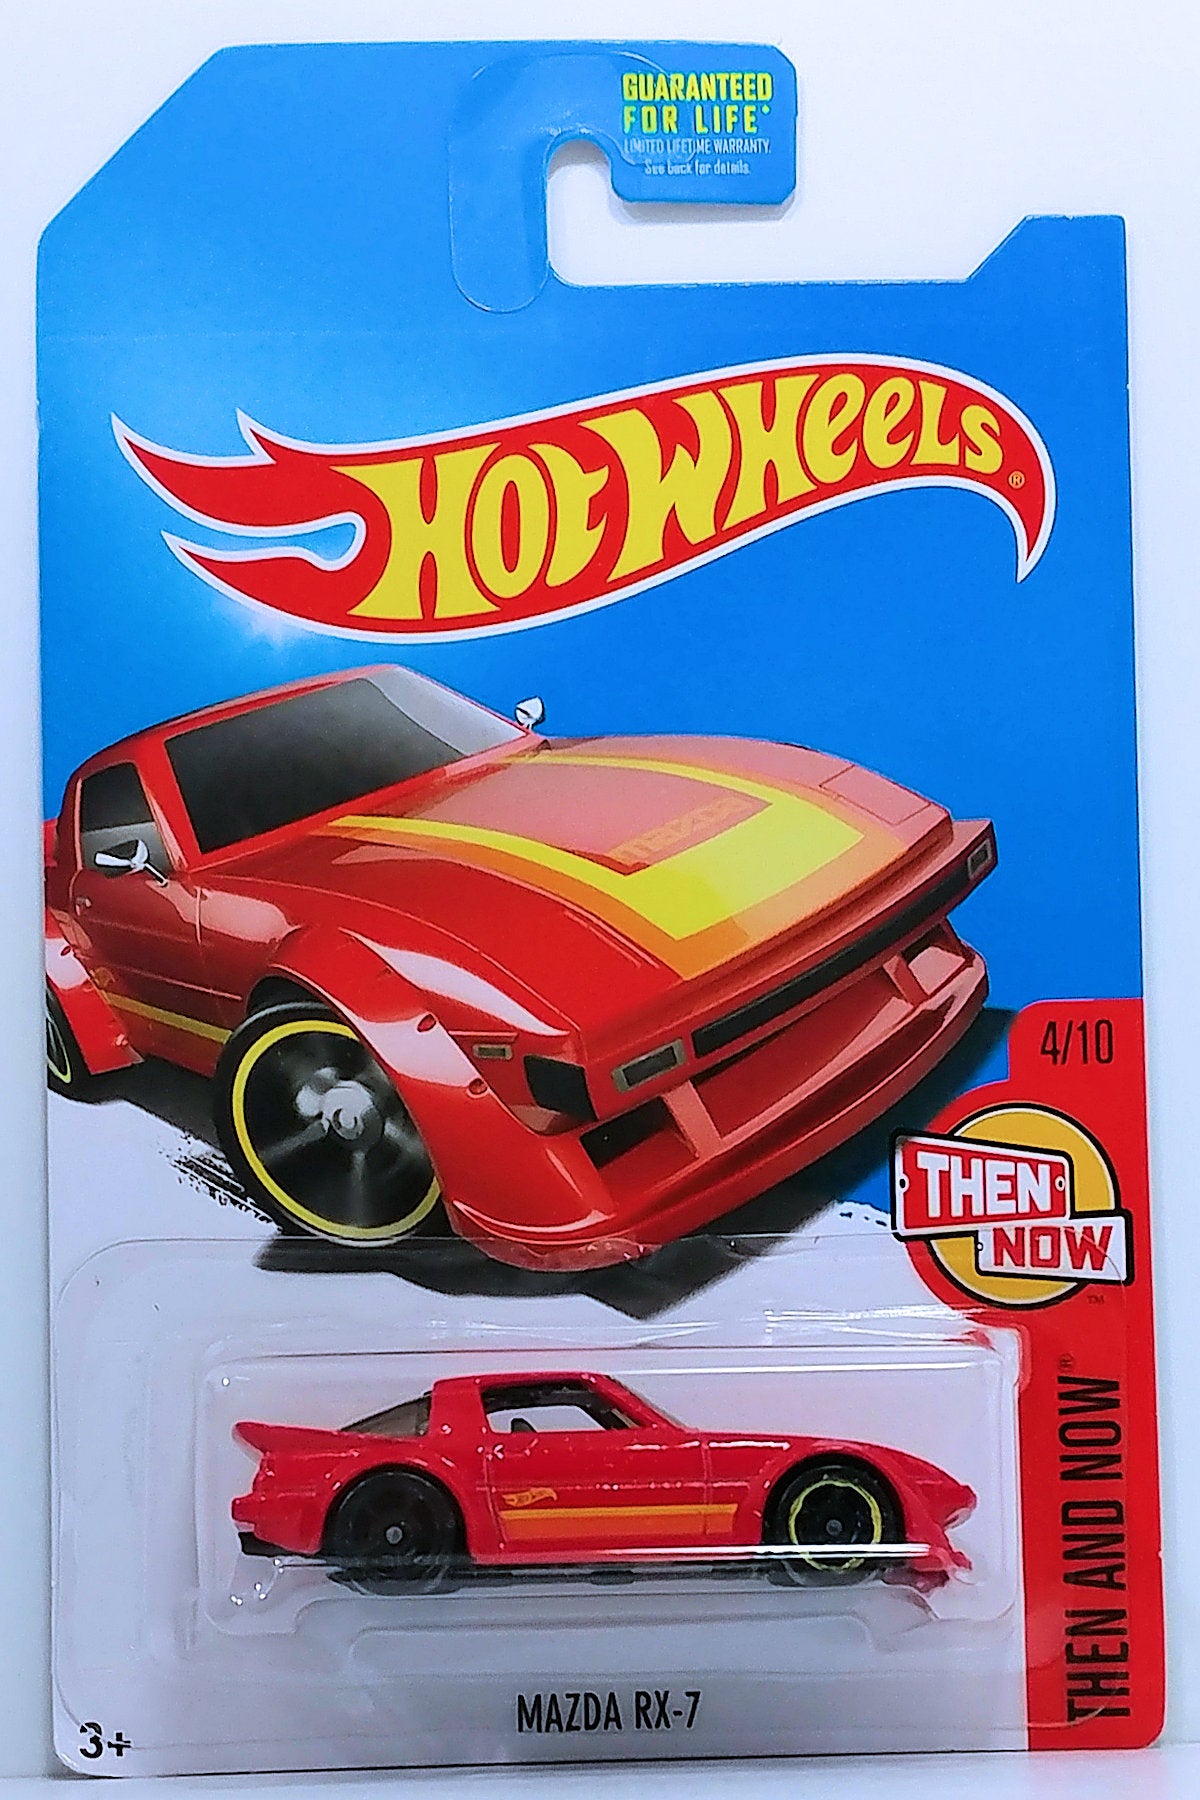 Hot Wheels 2017 - Kmart Exclusive - Then And Now 4/10 - Mazda RX-7 - Red - Rear Wheel is NOT Chromed, ERROR!